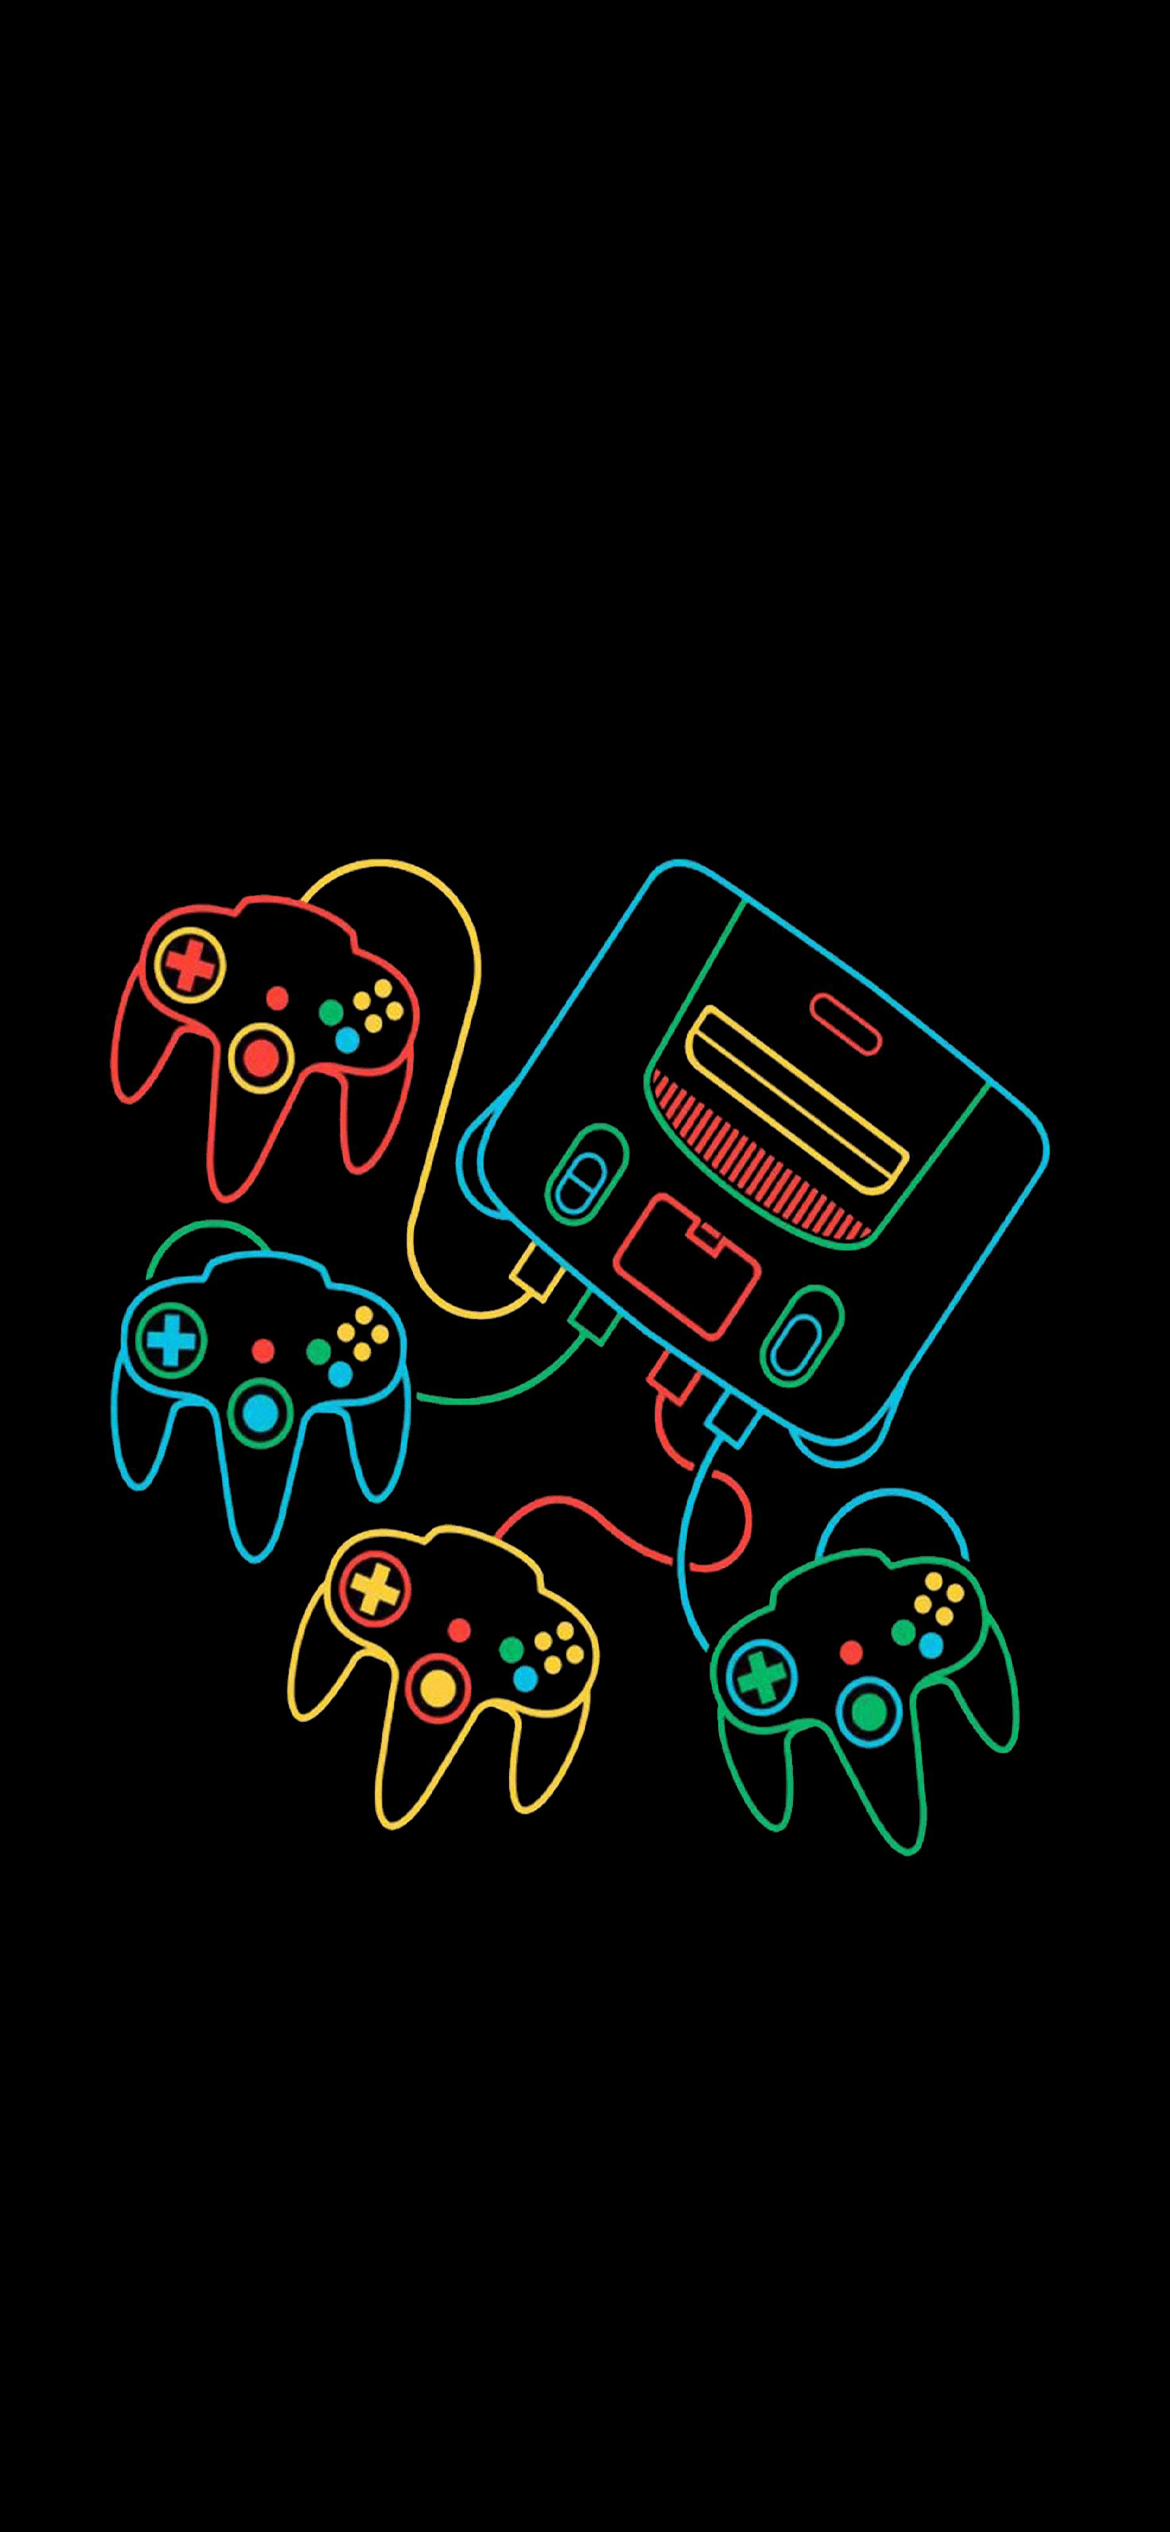 A neon sign of a gaming console and controllers - Nintendo